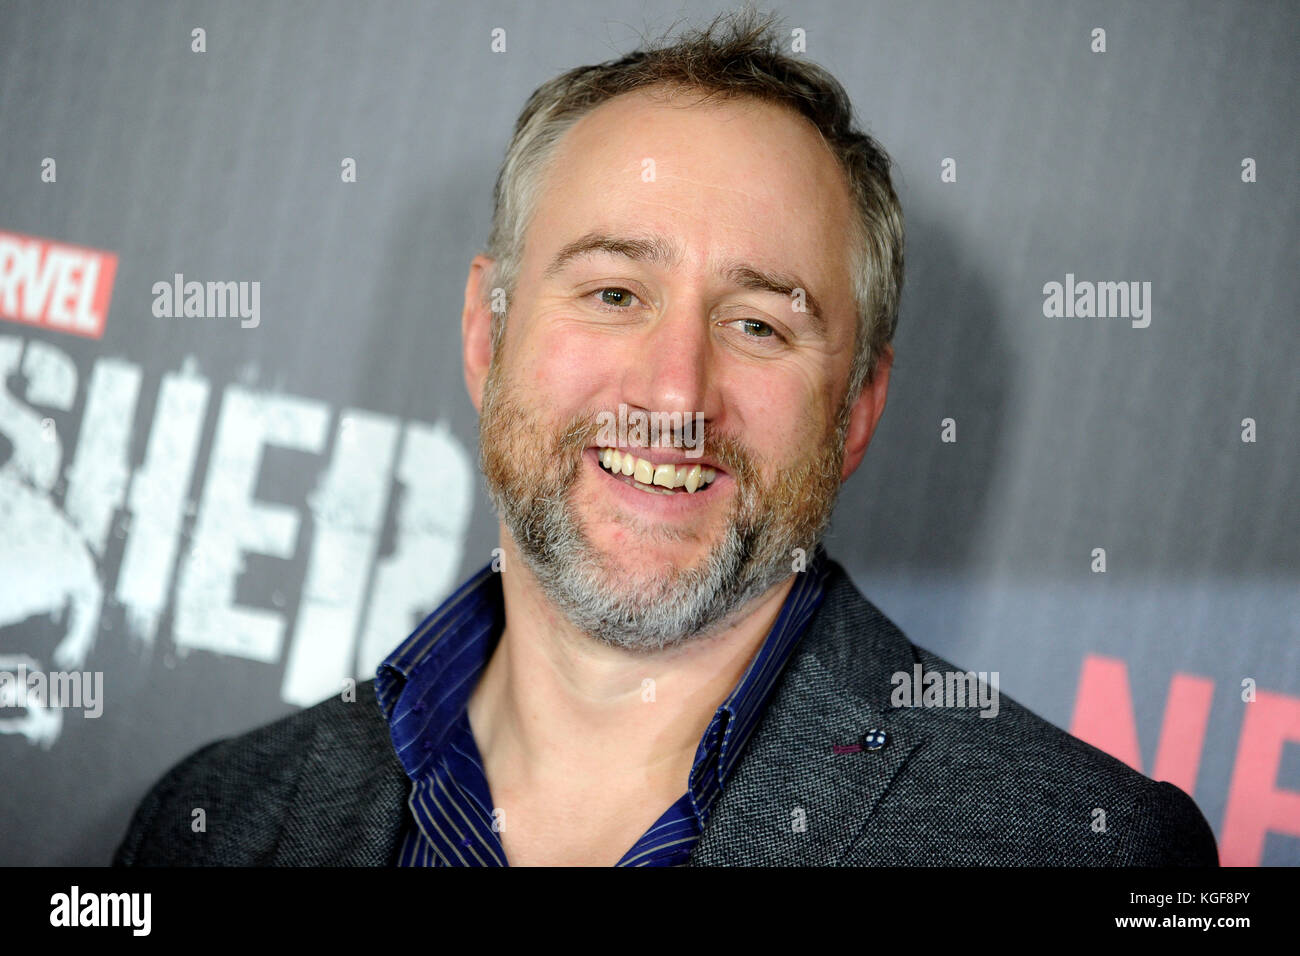 Steve Lightfoot attends the Netfilx TV serious premiere of 'The Punisher' at AMC Loews on November 6, 2017 in New York City. Stock Photo